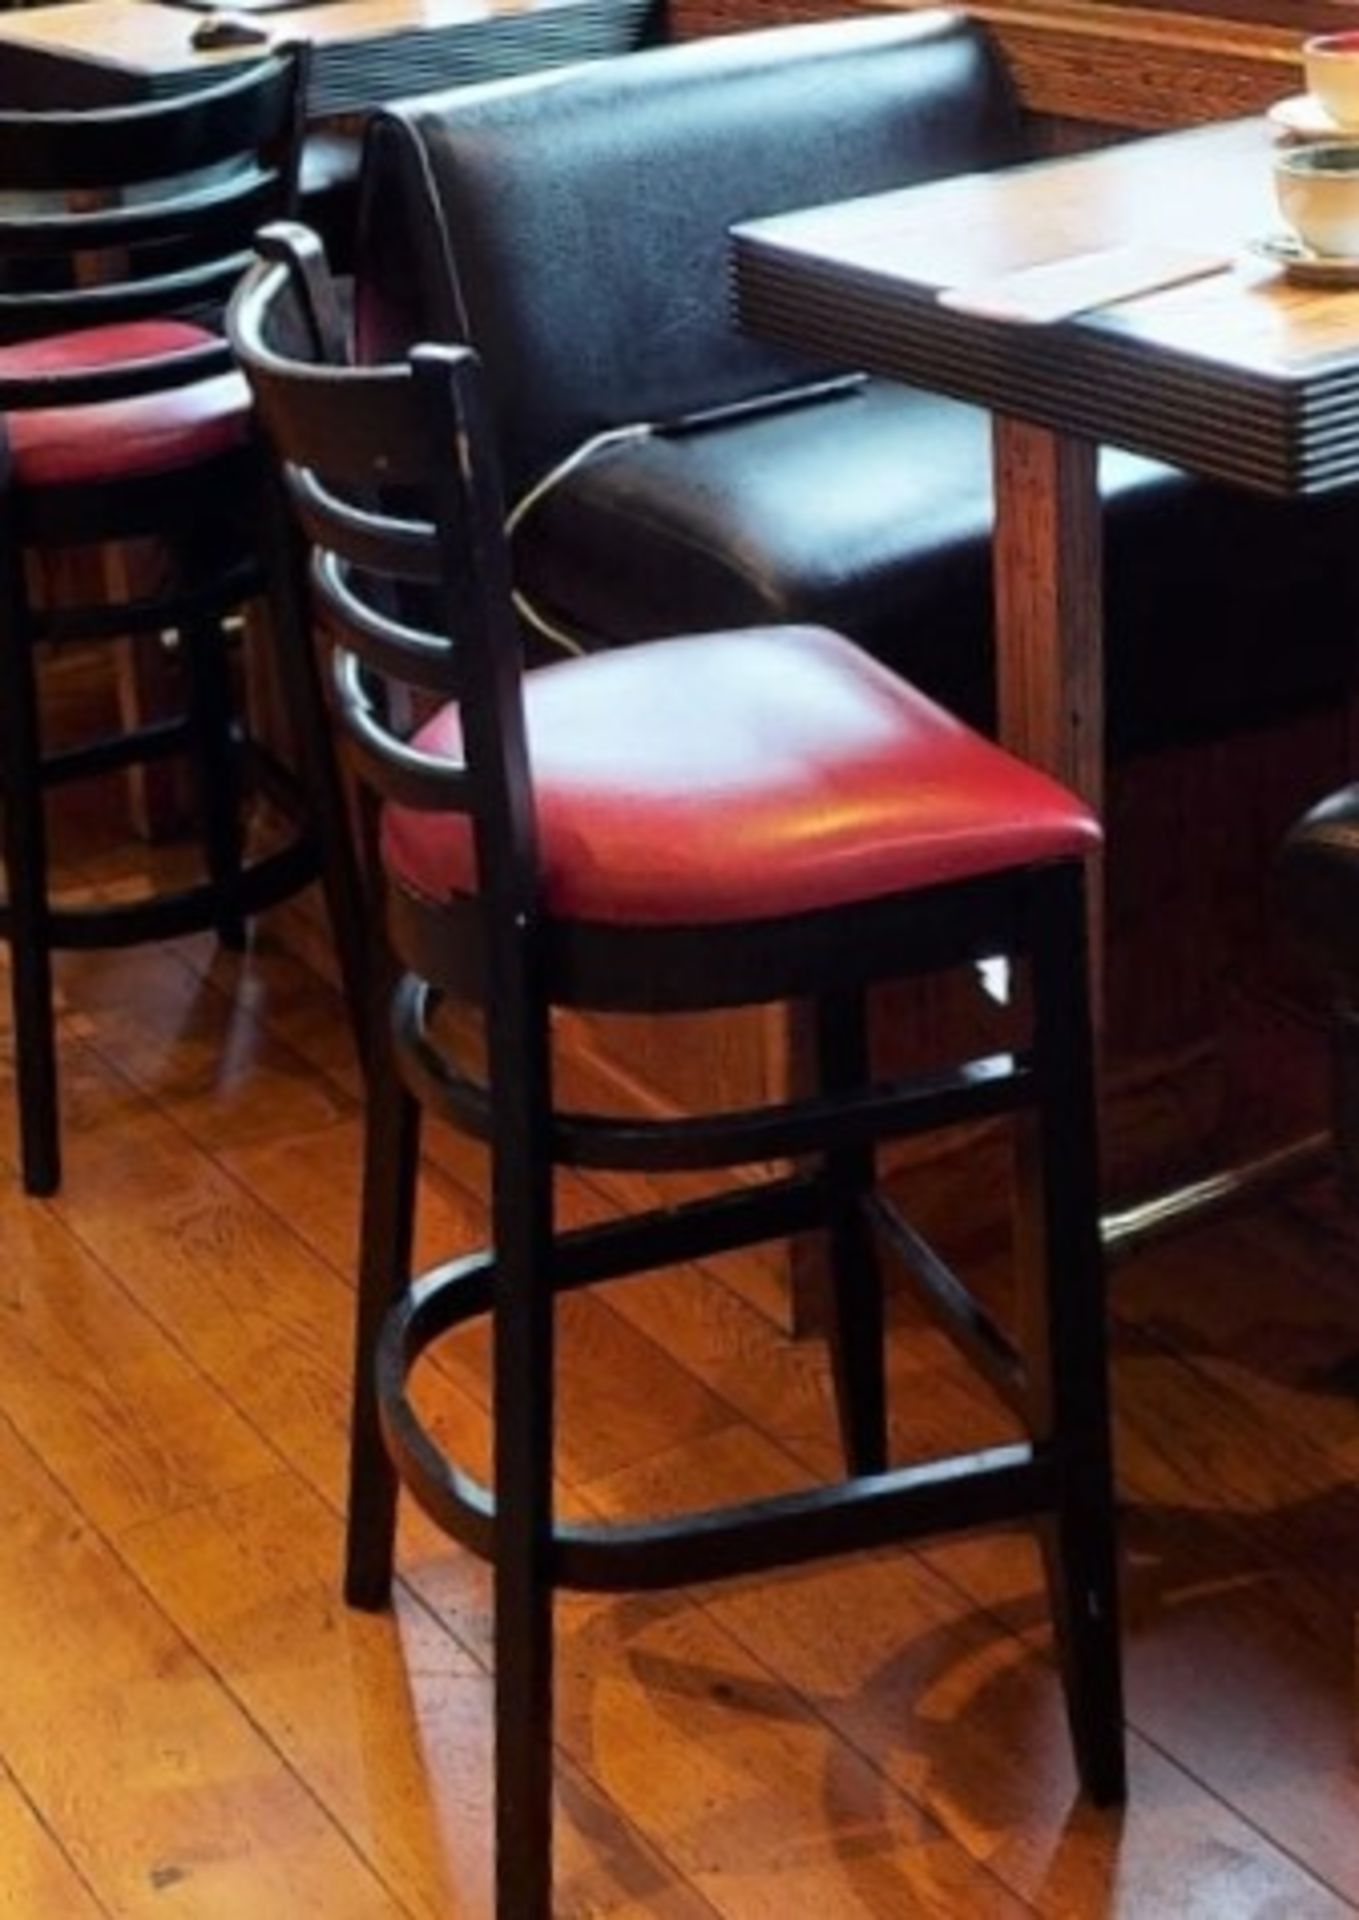 6 x Restaurant Bar Stools - Black Finish With Various Coloured Seat Pads - Image 2 of 5